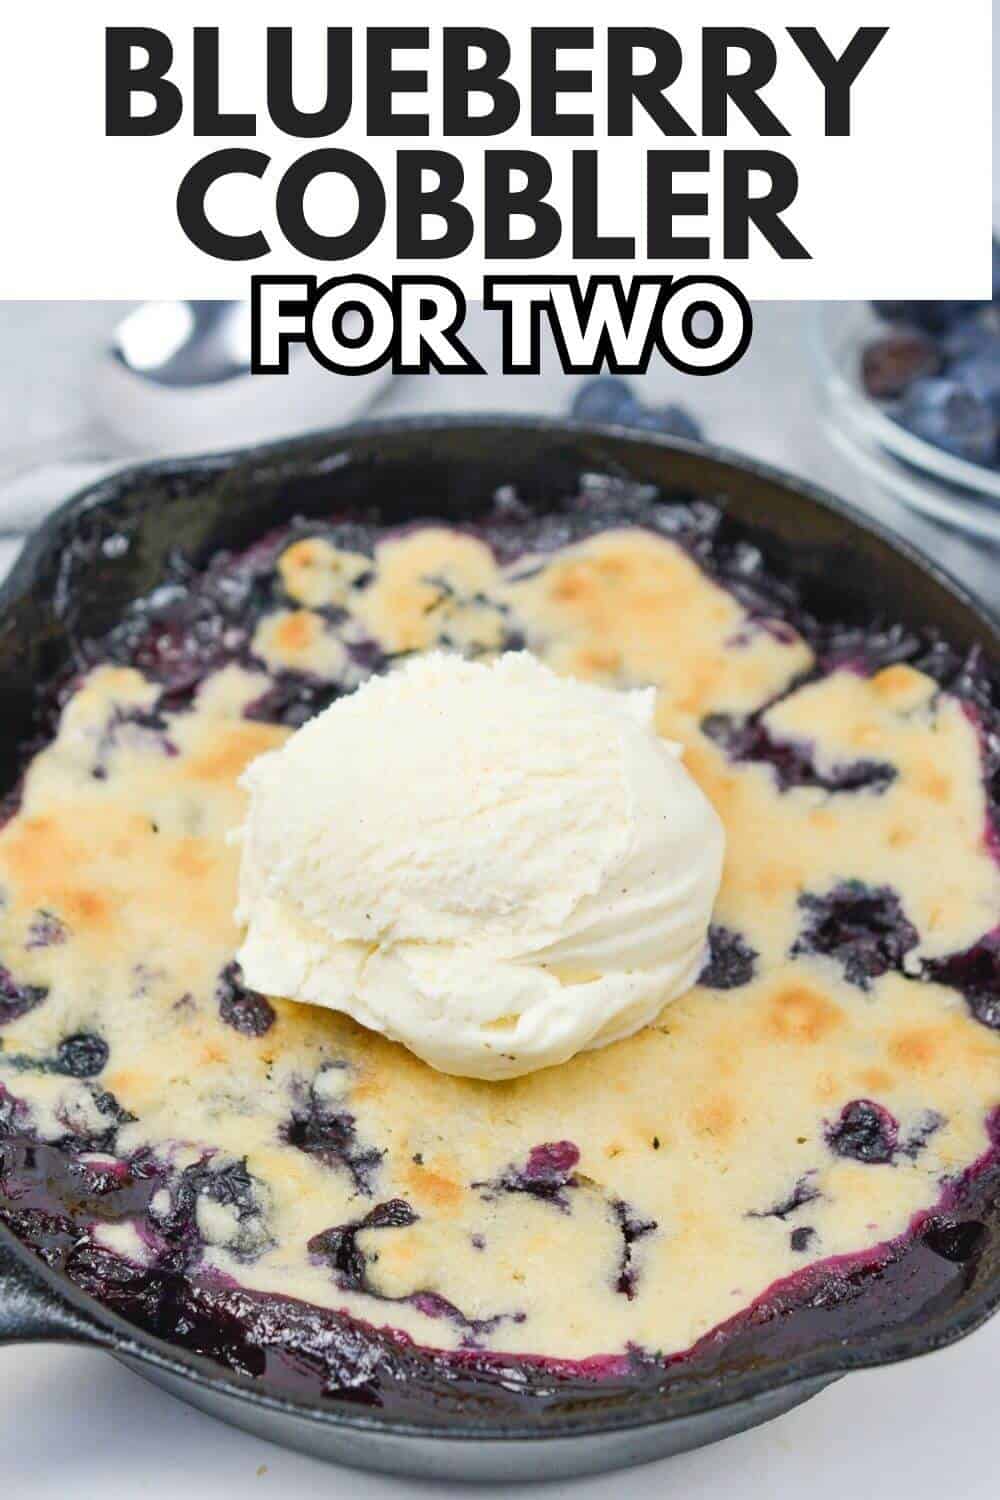 Blueberry cobbler for two with recipe title text overlay.